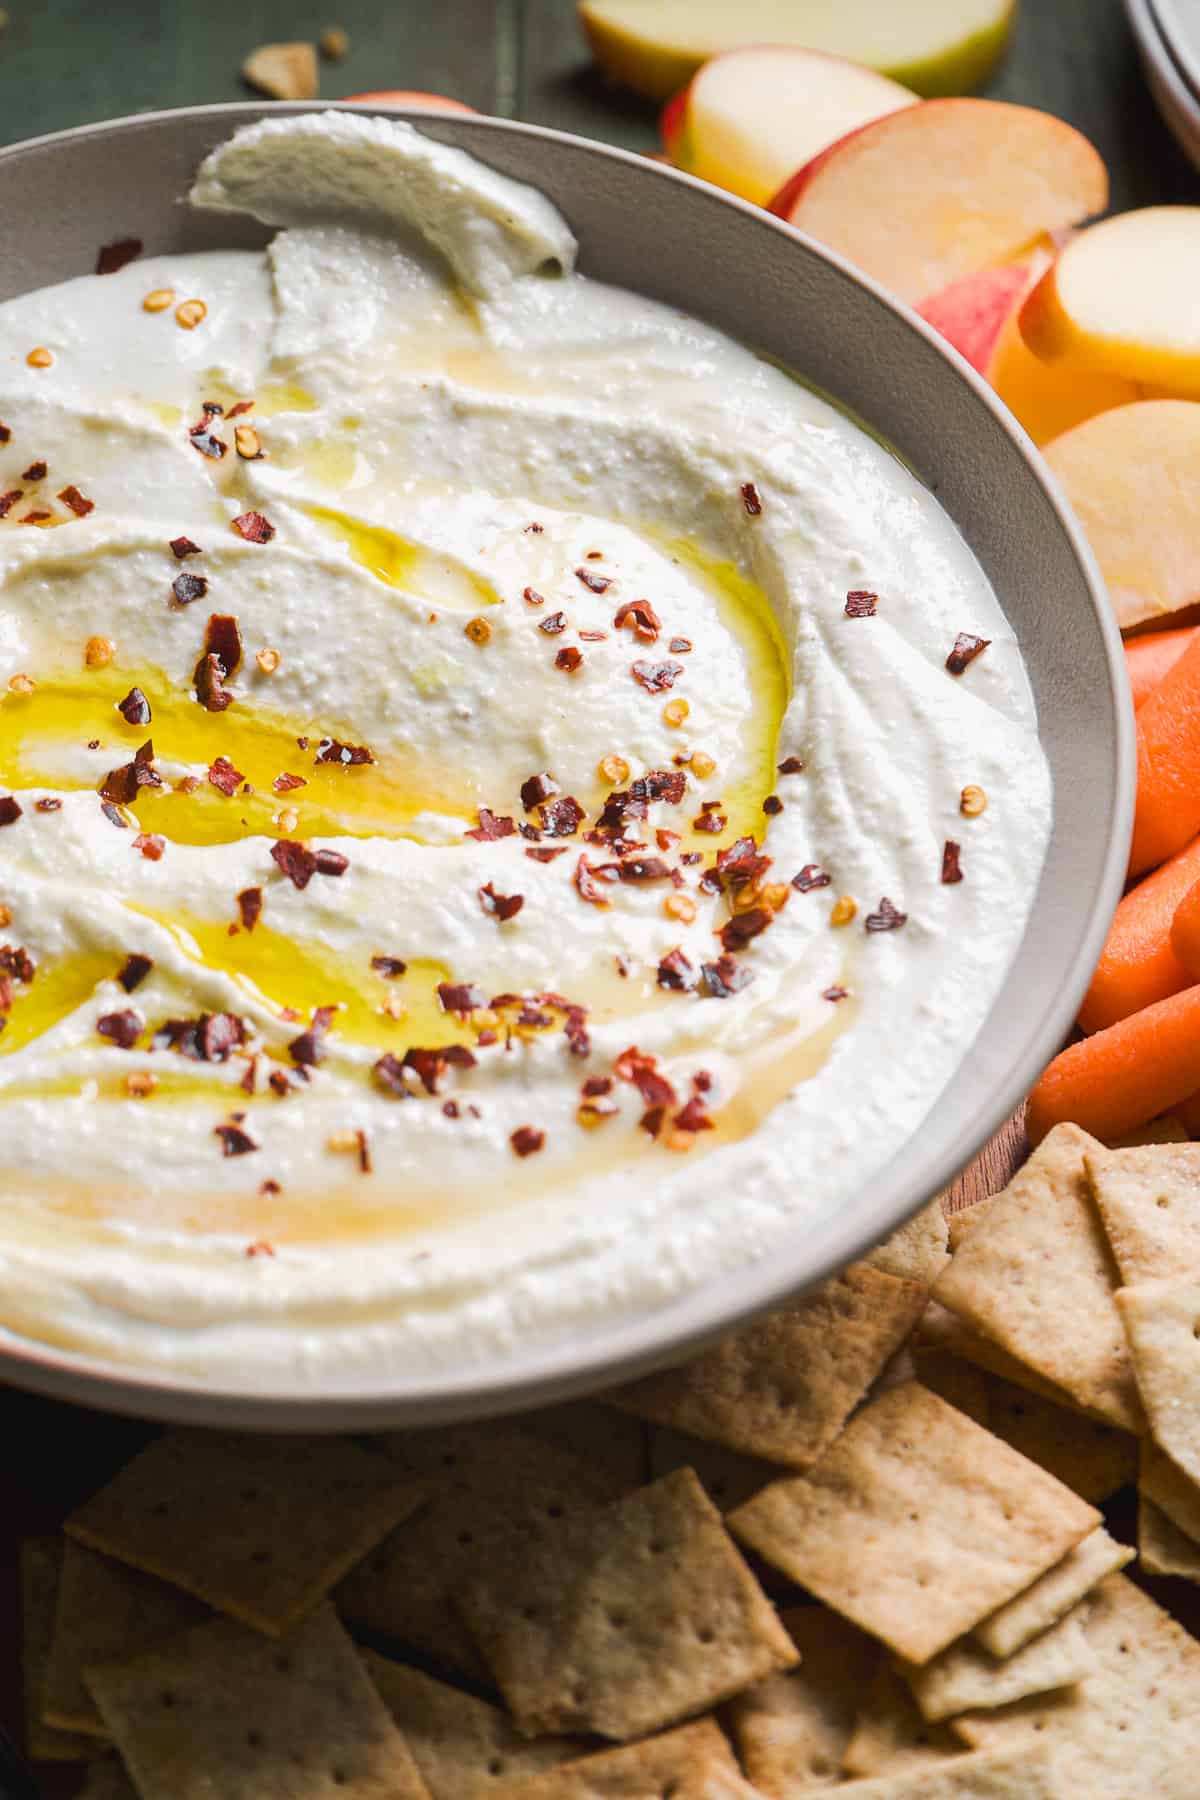 Whipped feta with red pepper flakes in a bowl.